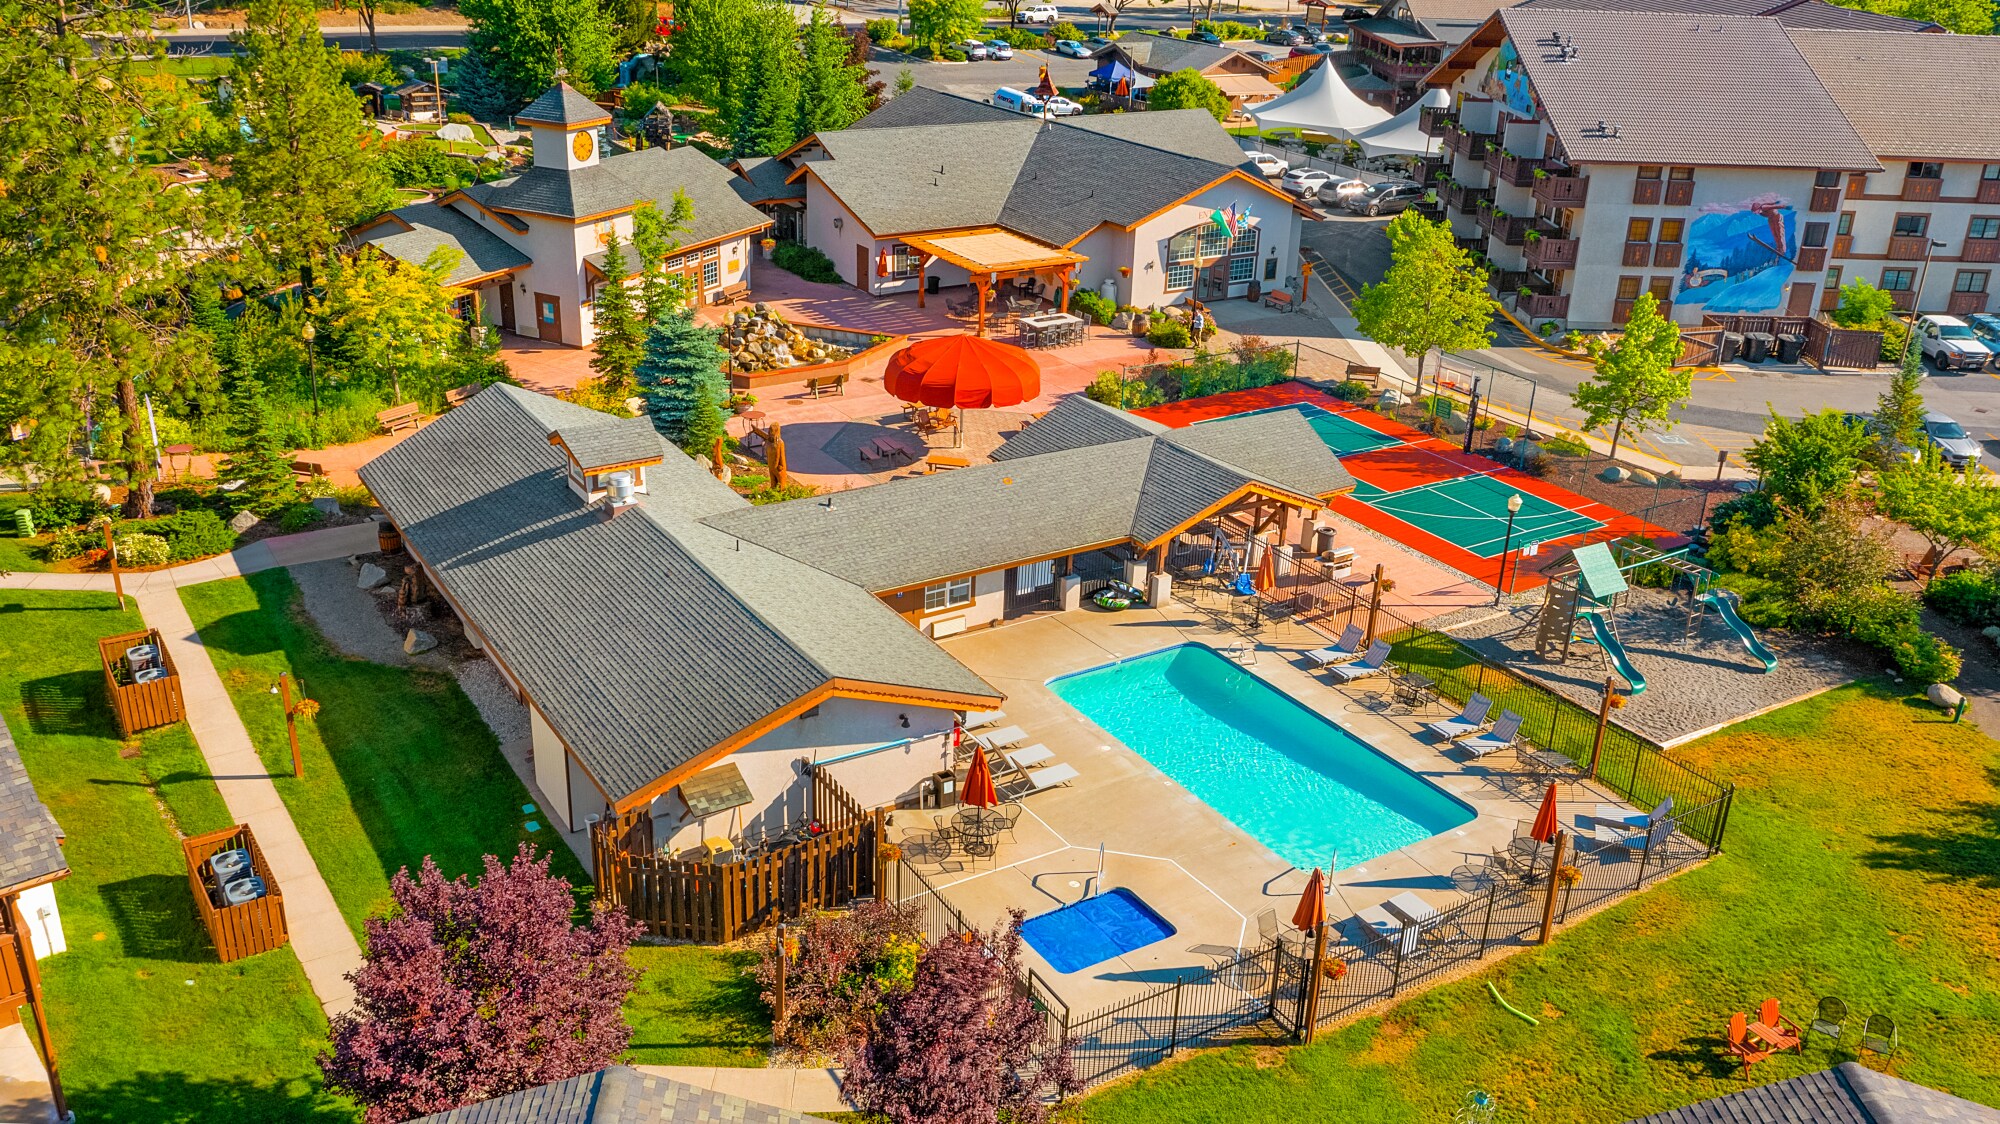 Romanna's all-season getaway at Icicle Village w/pool and hot tub